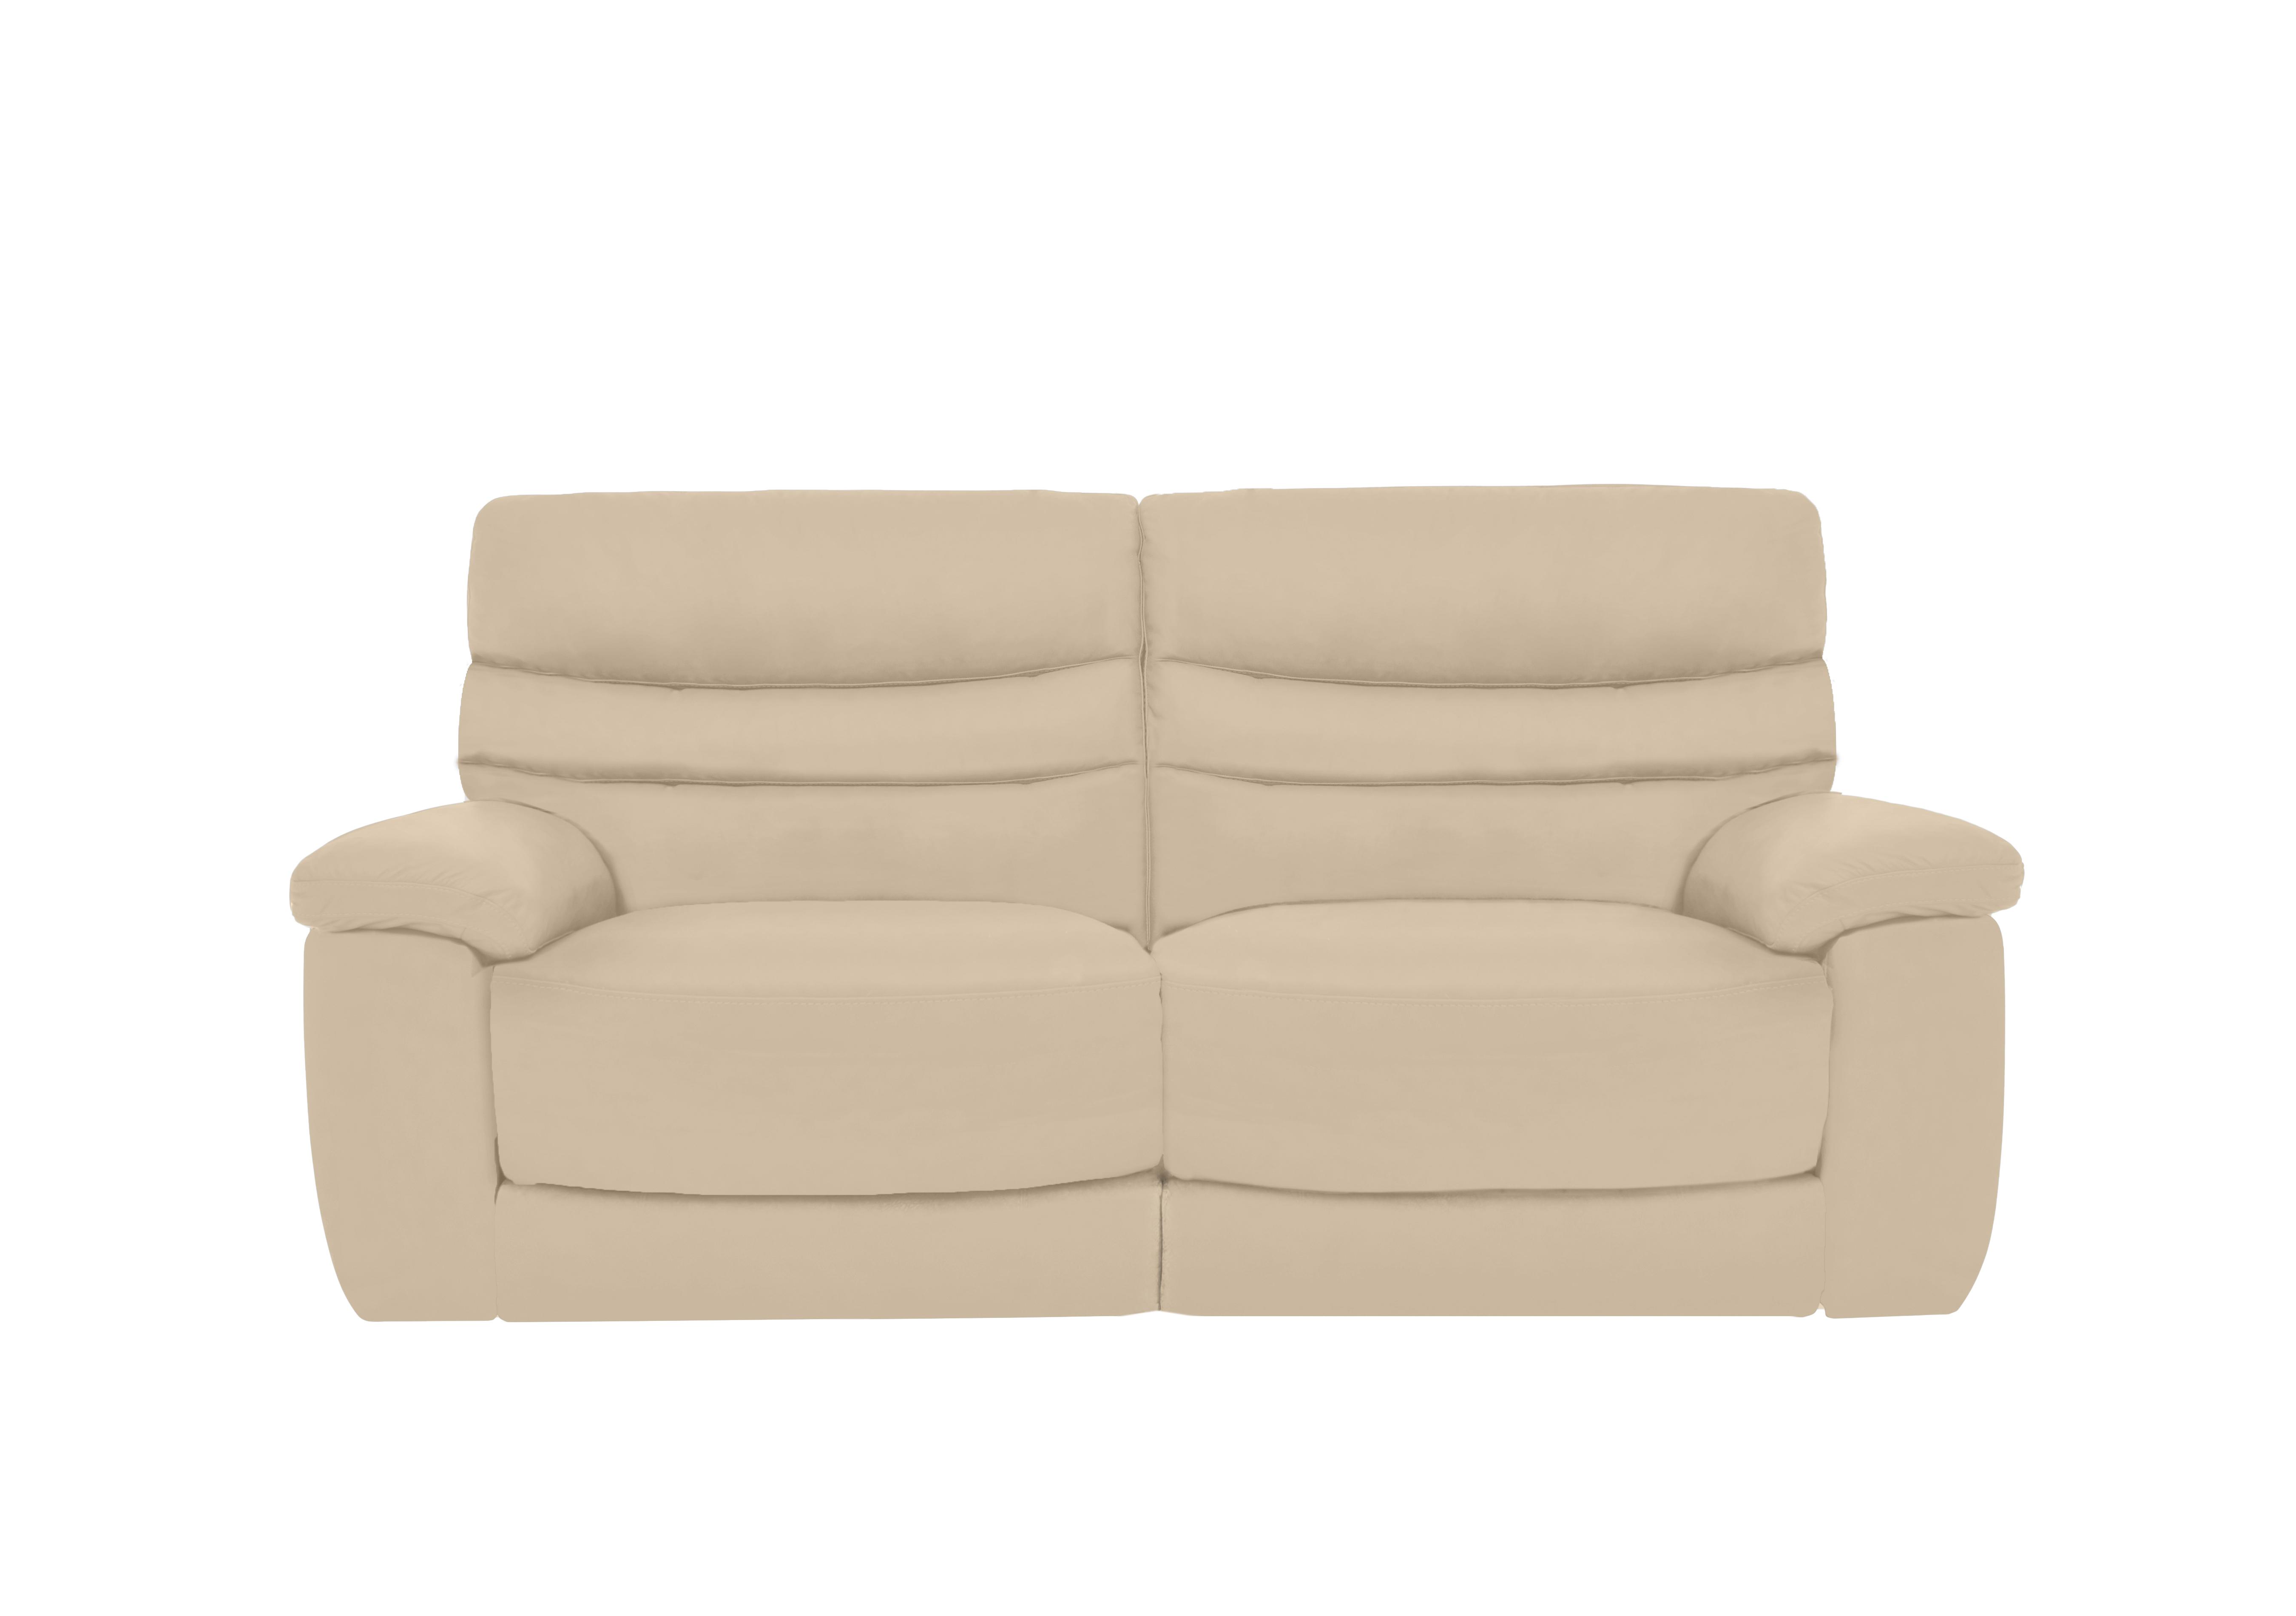 Nimbus 3 Seater Leather Power Recliner Sofa with Power Headrests and Power Lumbar in Bx-862c Bisque on Furniture Village